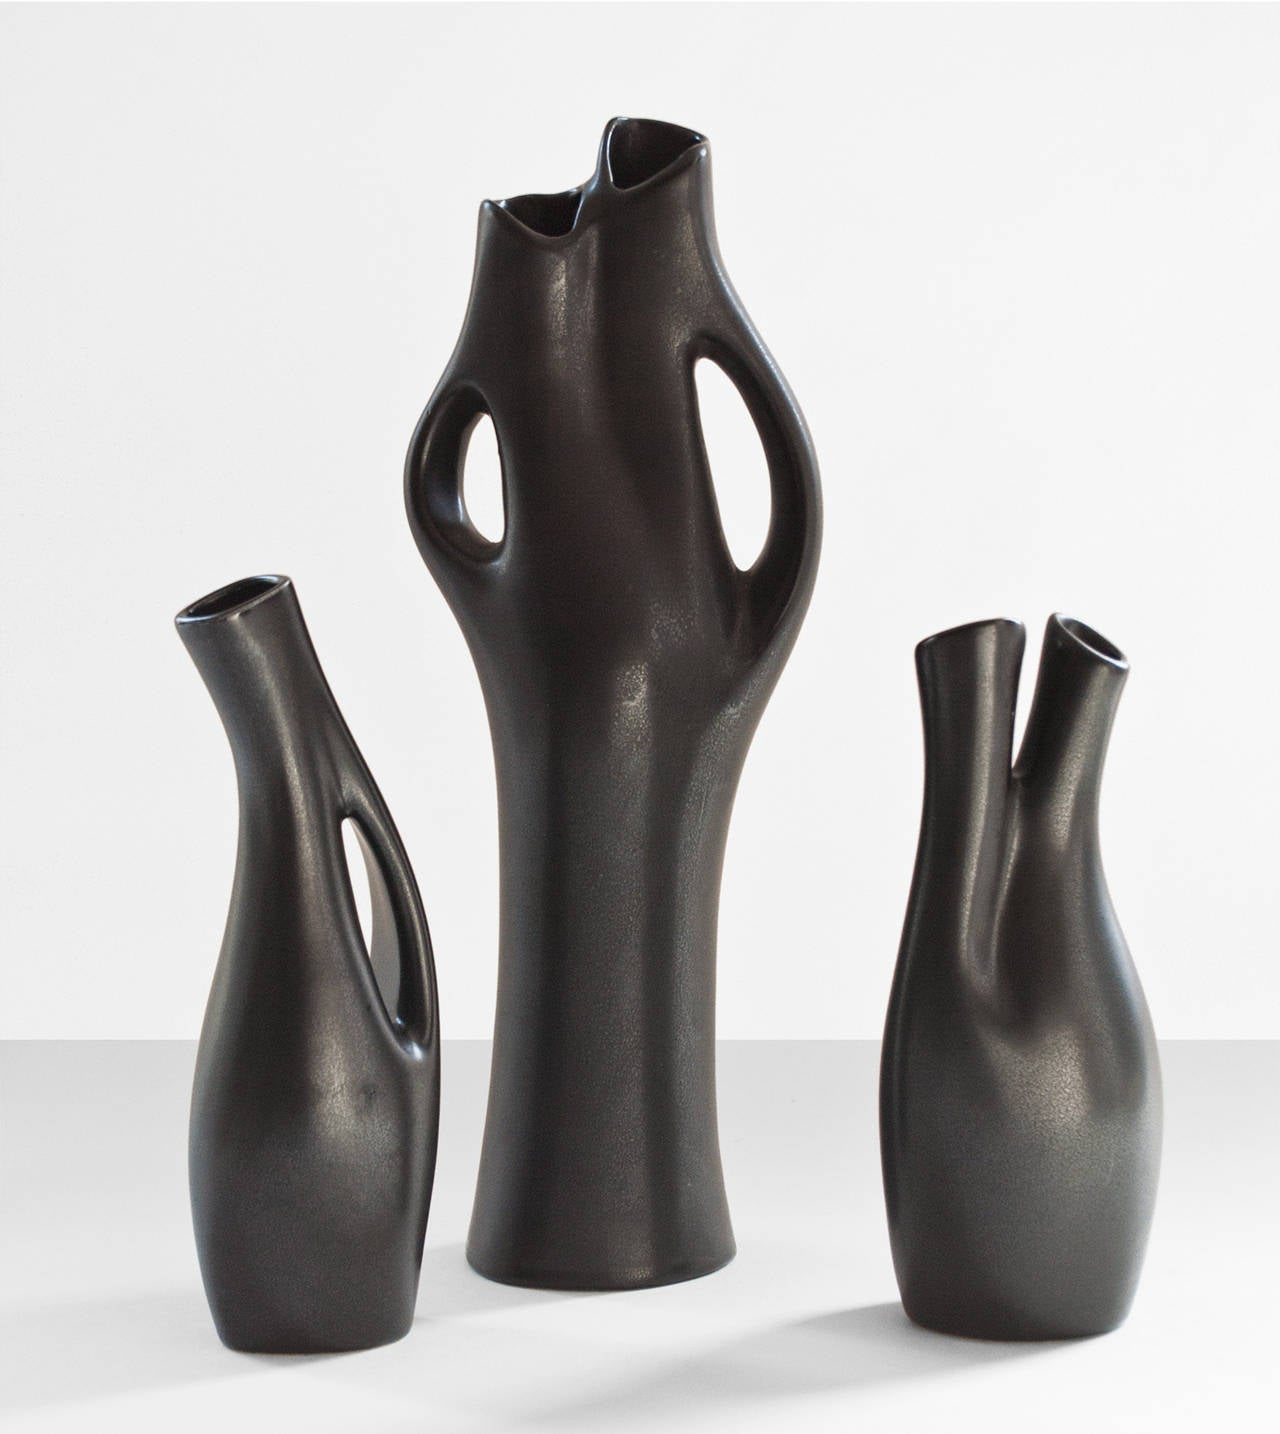 Lillemor Mannerheim designed vases for Gefle Porcelain Company. She was noted for her abstract shapes and black glazing refereed to as Mangania. Her works are represented at the National Museum in Stockholm. These vases are signed, Tallest H: 12.5